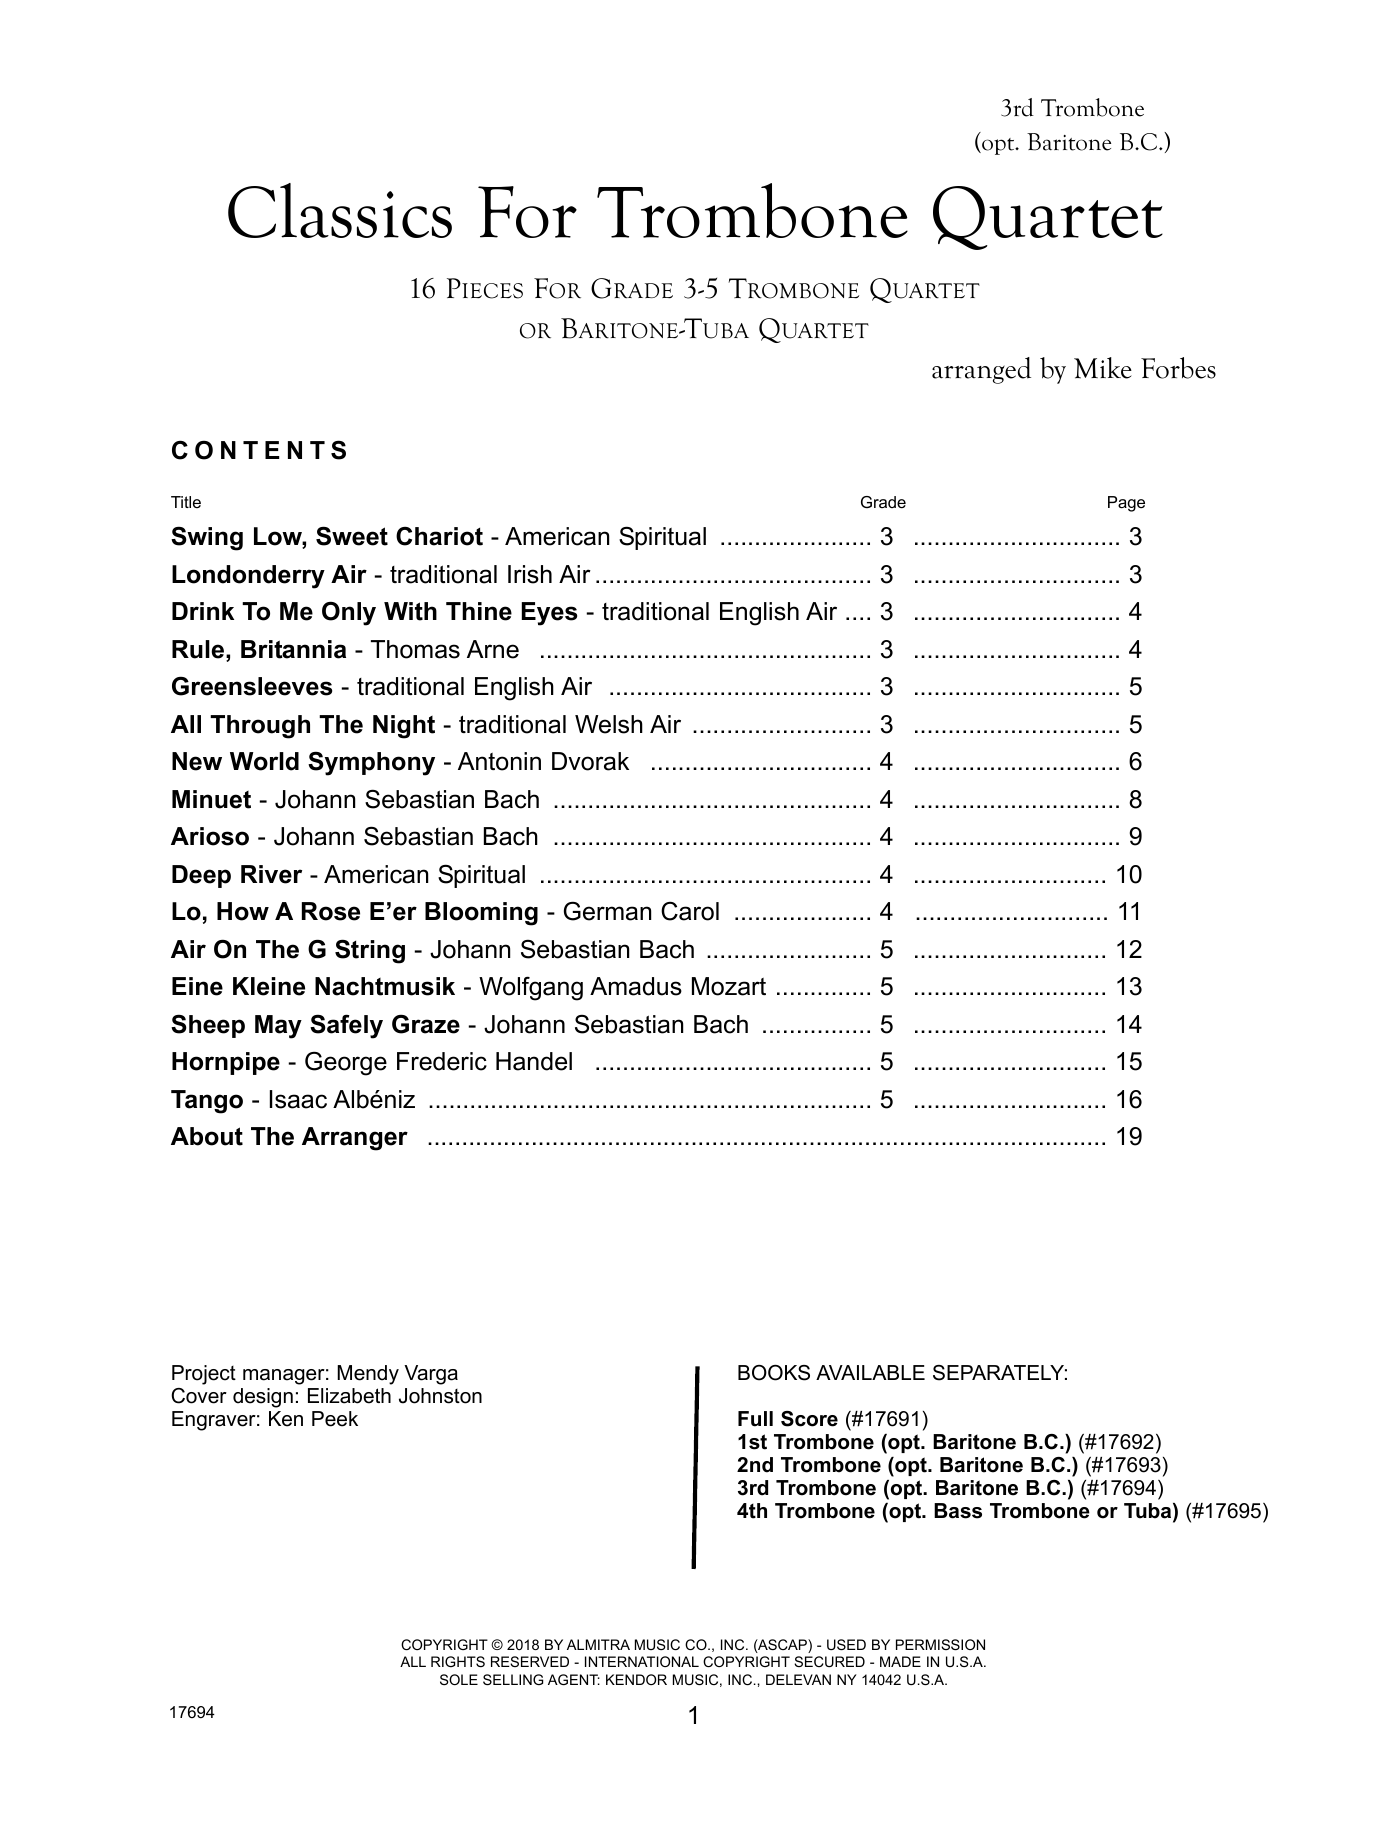 Download Mike Forbes Classics For Trombone Quartet - 3rd Tro Sheet Music